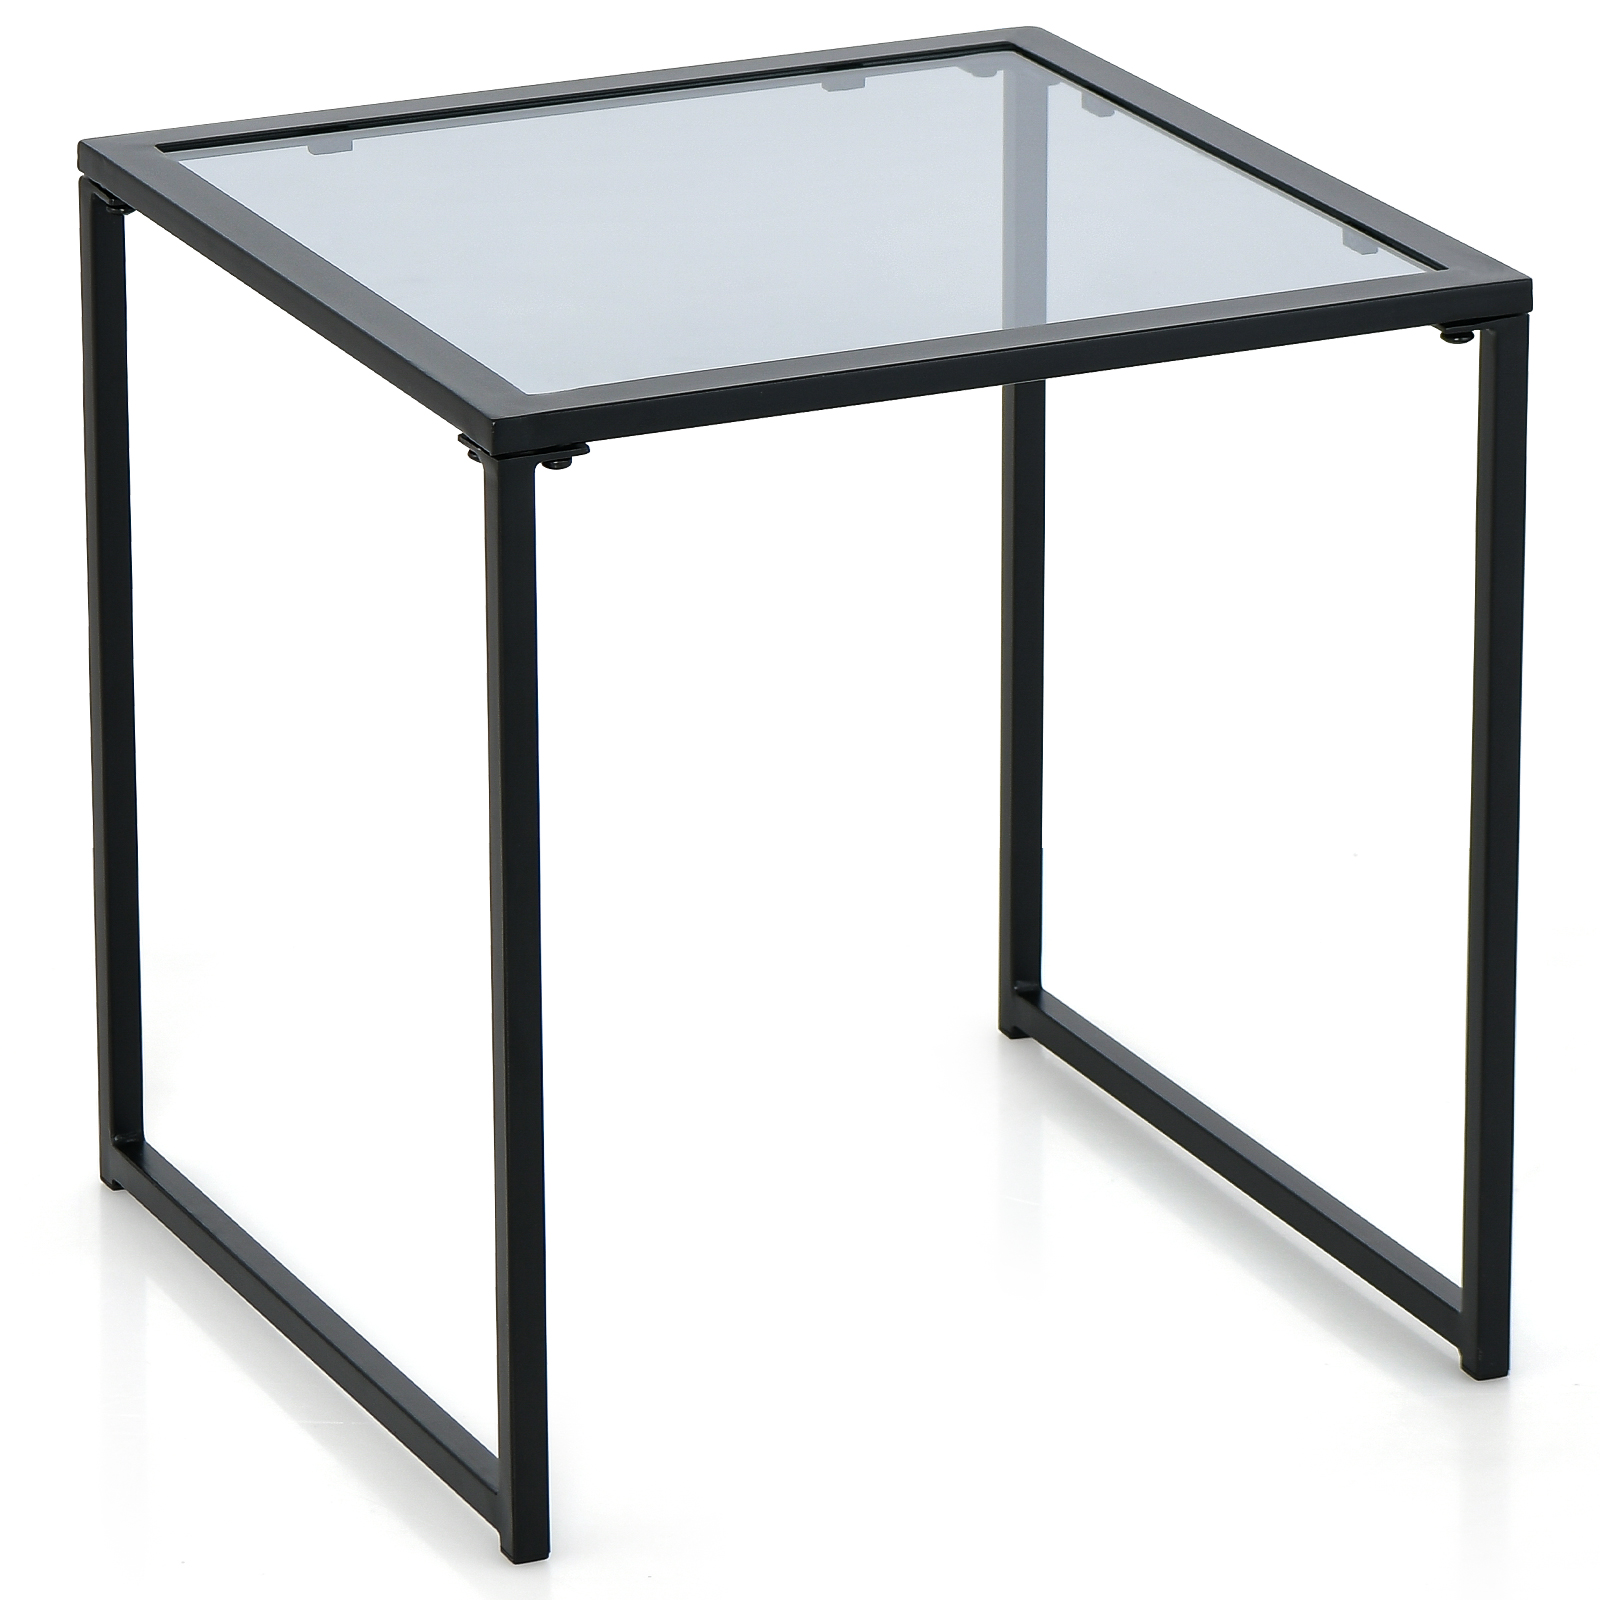 43cm_Tempered_Glass_Top_Side_Table_with_Metal_Frame-1.jpg